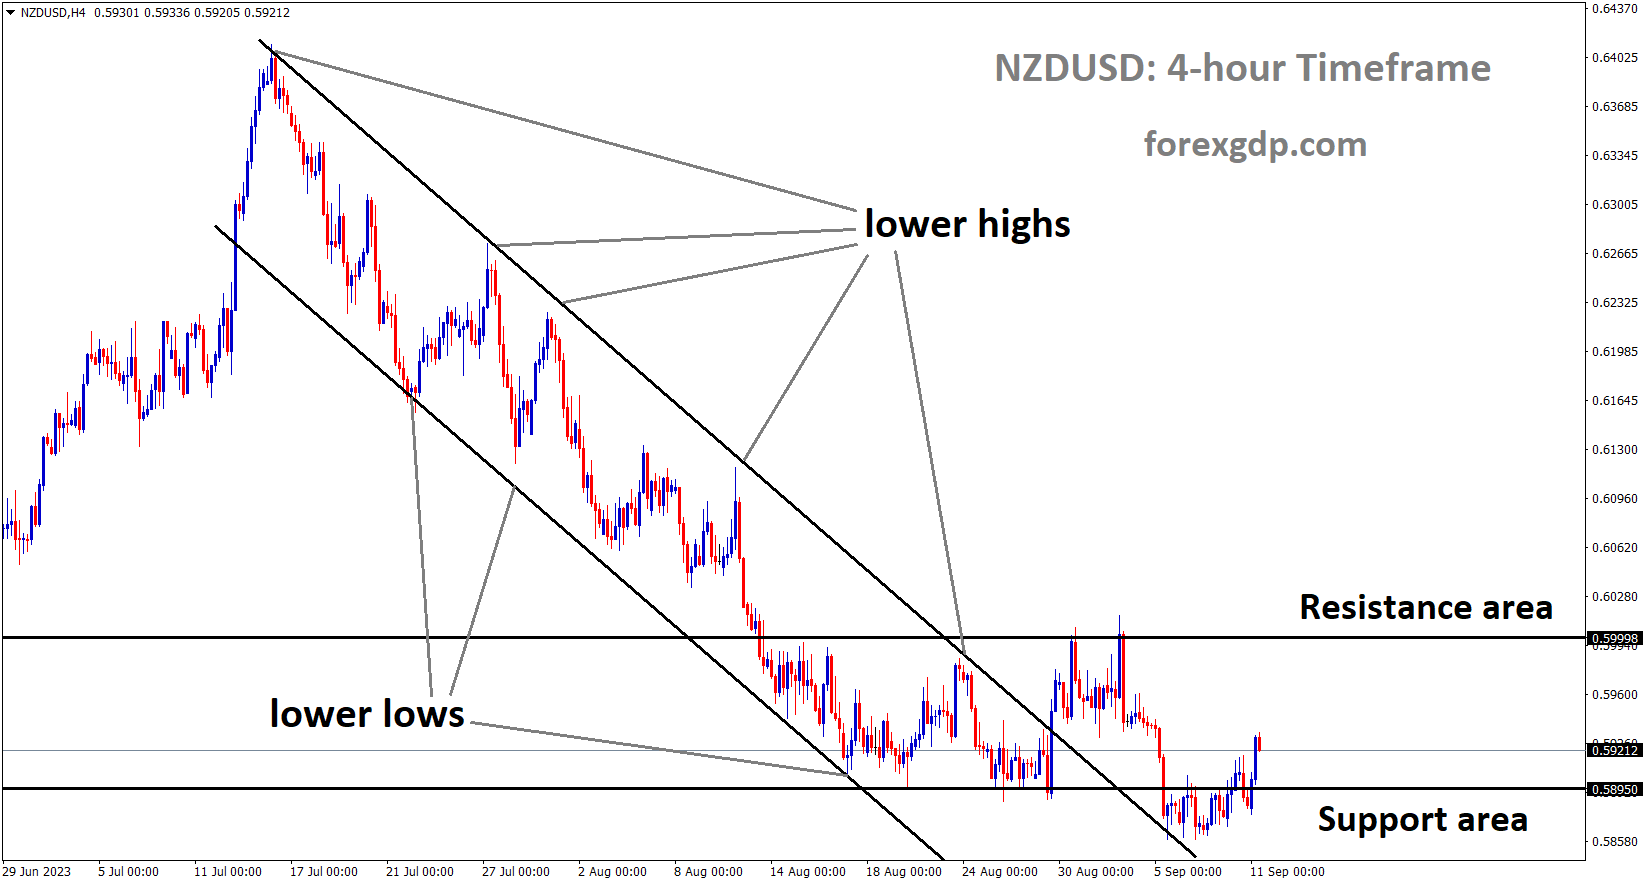 NZDUSD is moving in the Descending channel and the market has rebounded from the lower low area of the channel